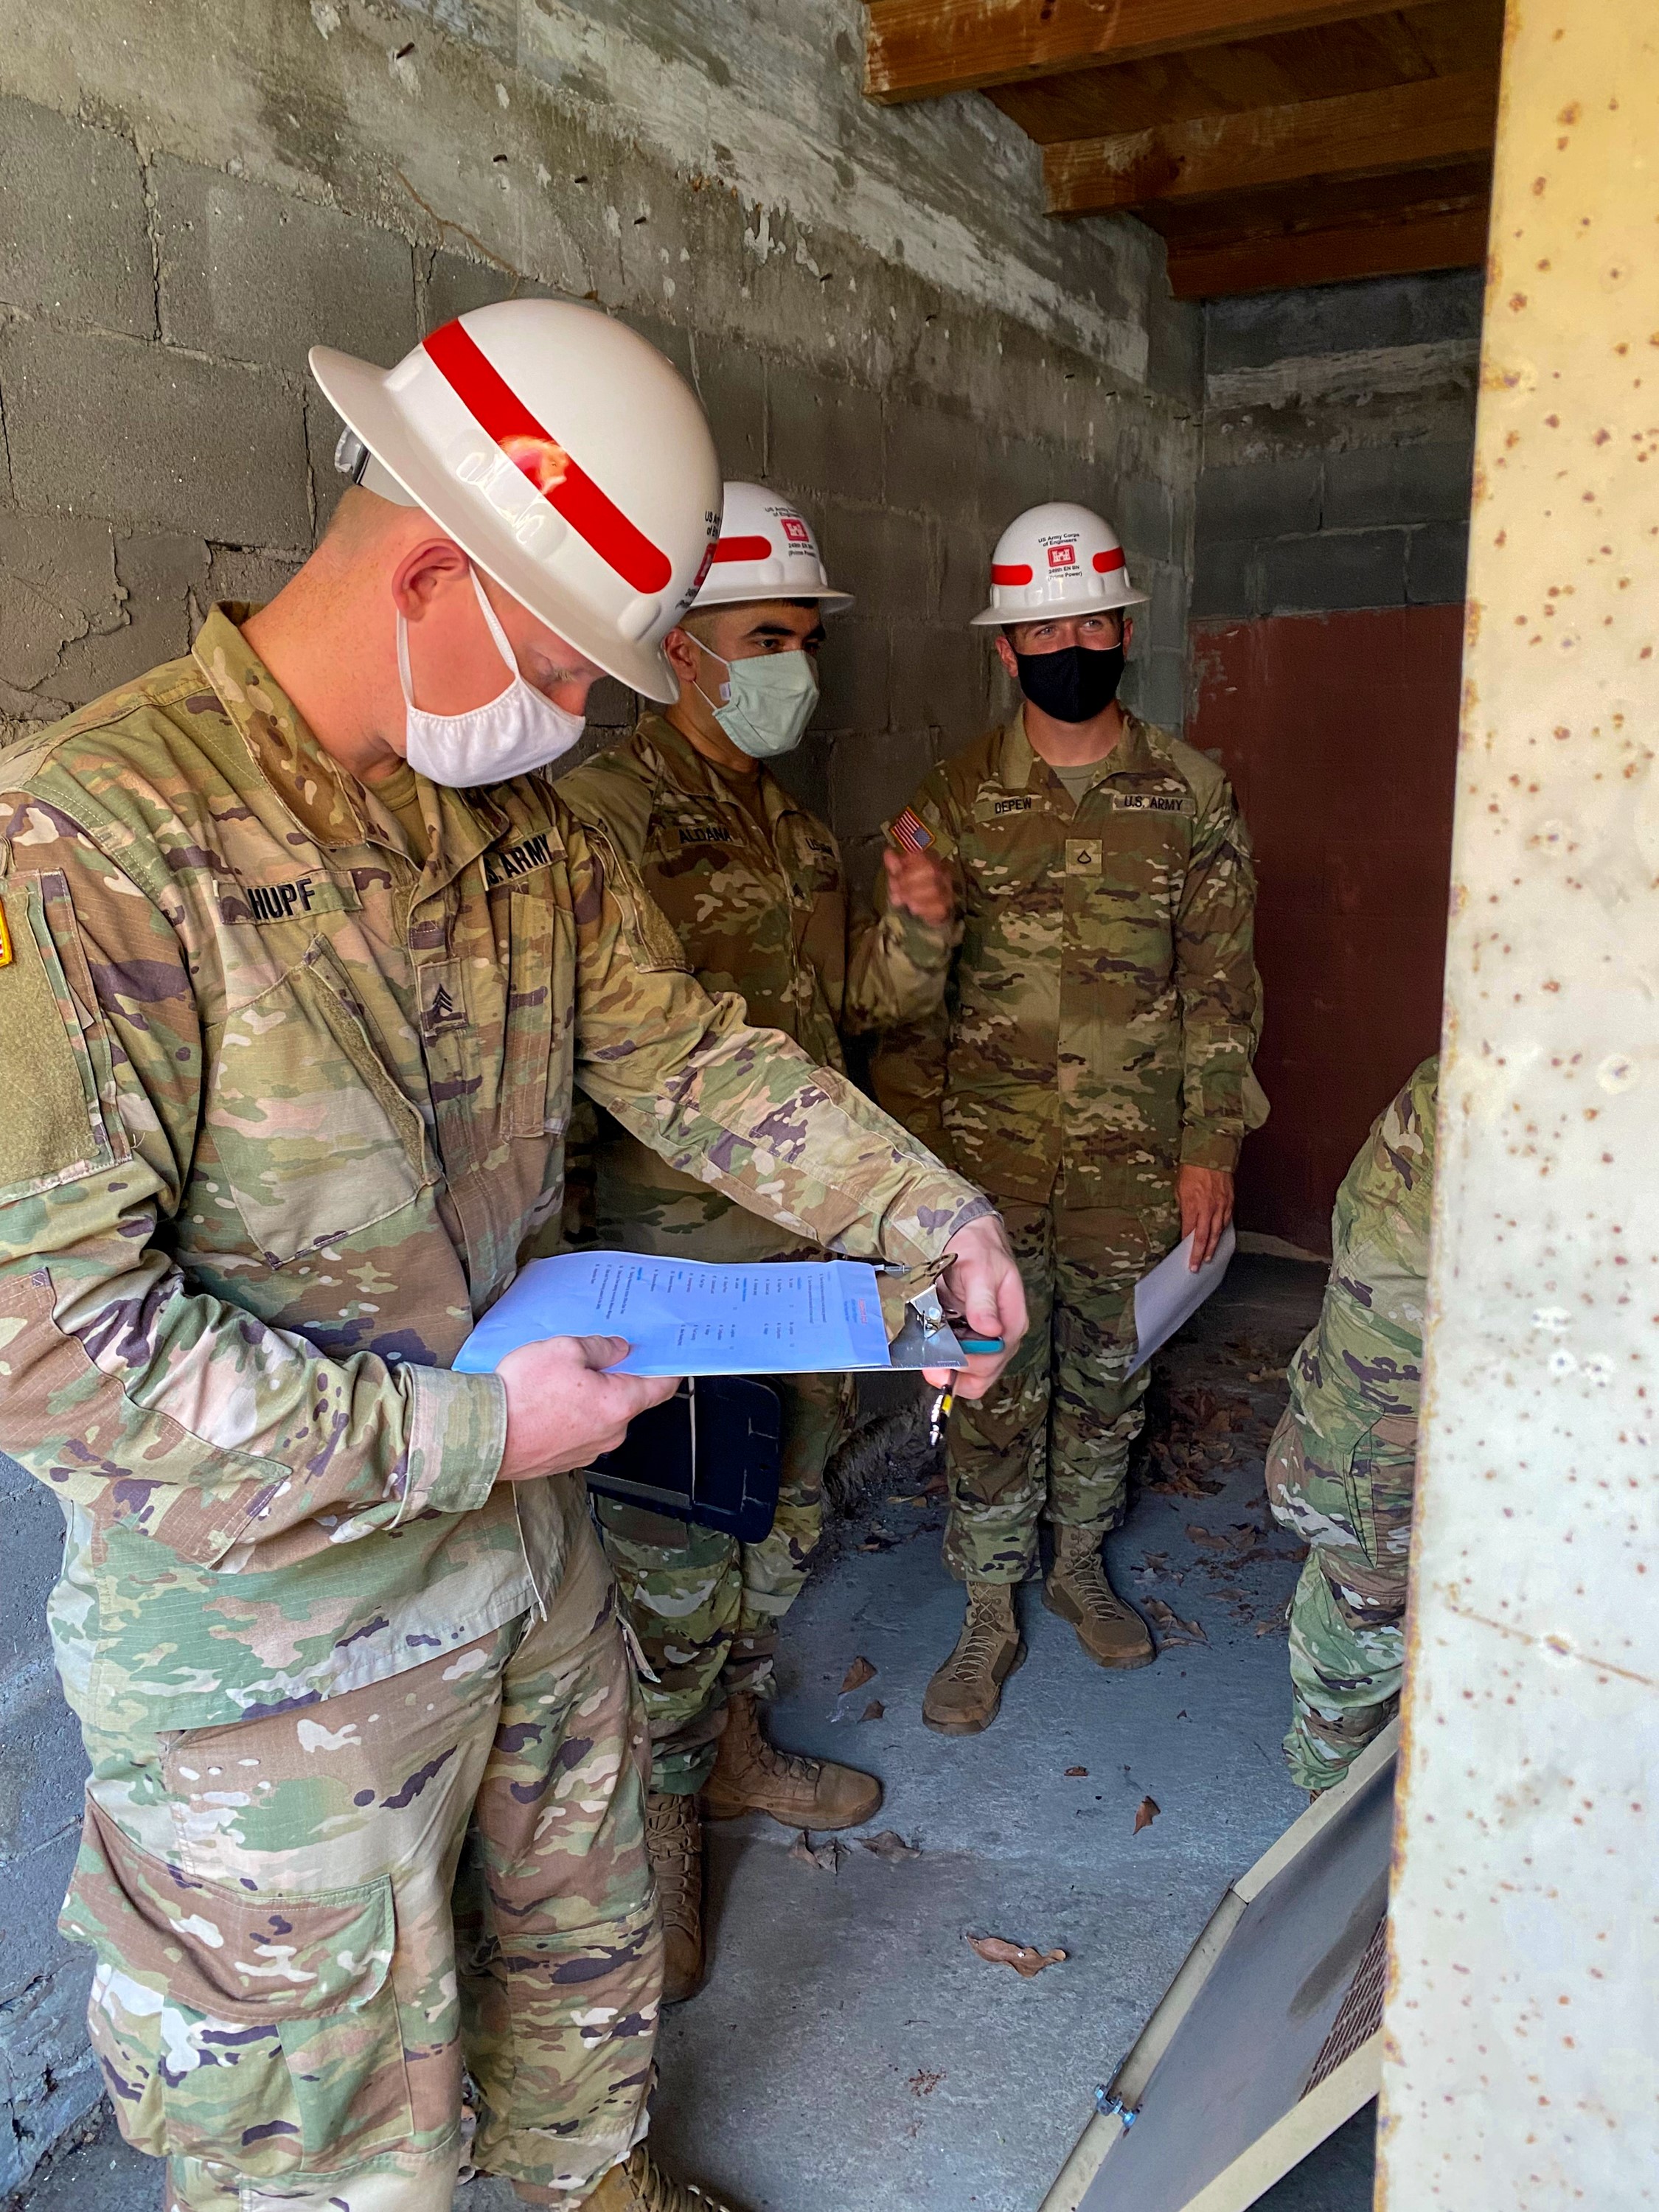 Sgt. Drake Hupf, (from left), Sgt. Joe Aldana and Pvt. Cameron Depew, of the Alpha Company of the 249th Engineer Battalion of the U.S Army Corps of Engineers, conduct an electrical assessment of a critical facility on St. Croix during their training mission.